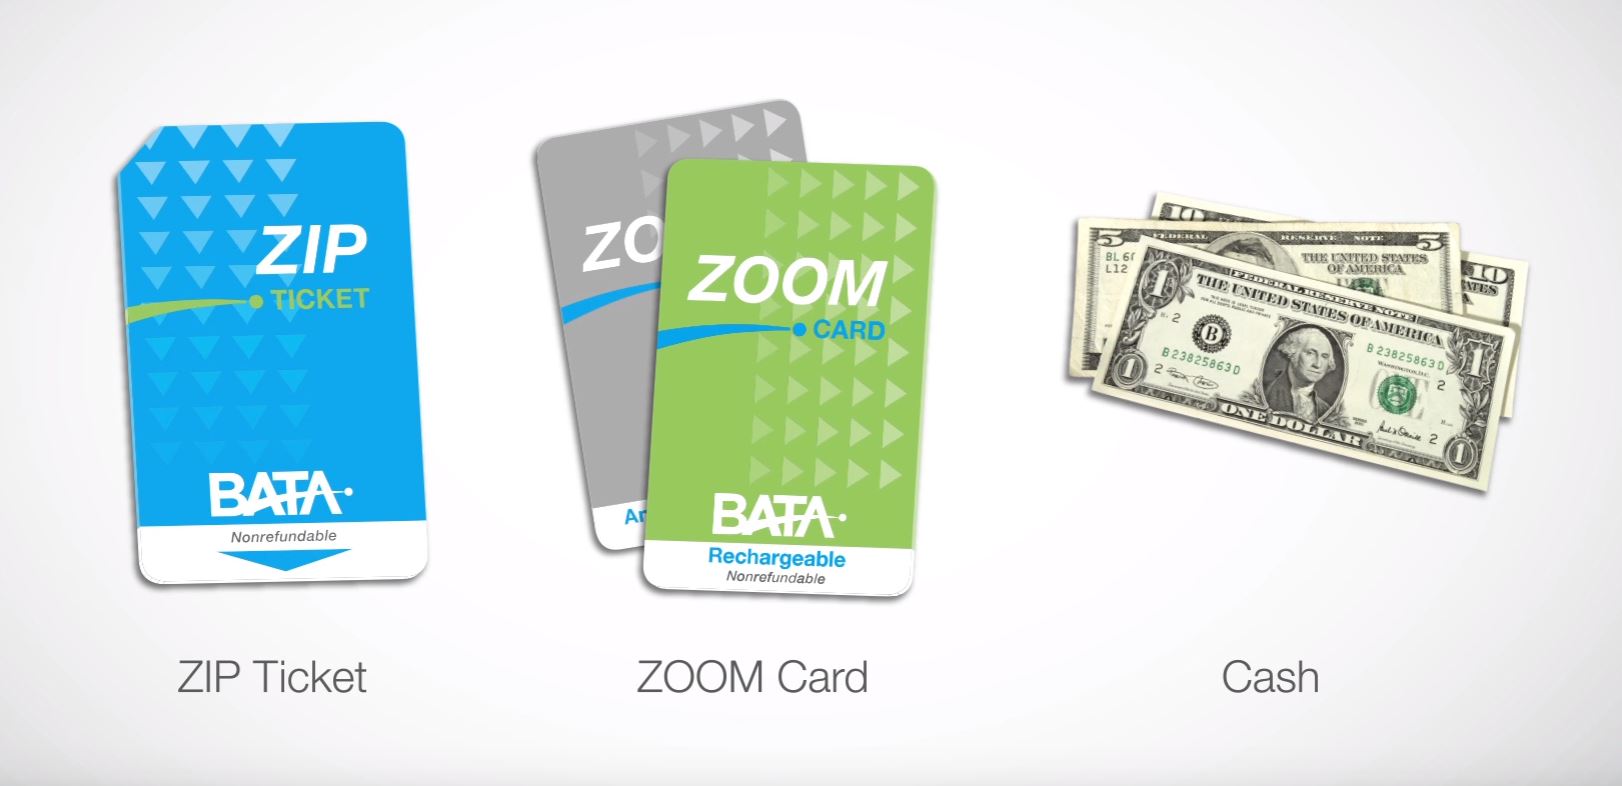 Samples of Zip Ticket, Zoom Card and cash as payment for BATA